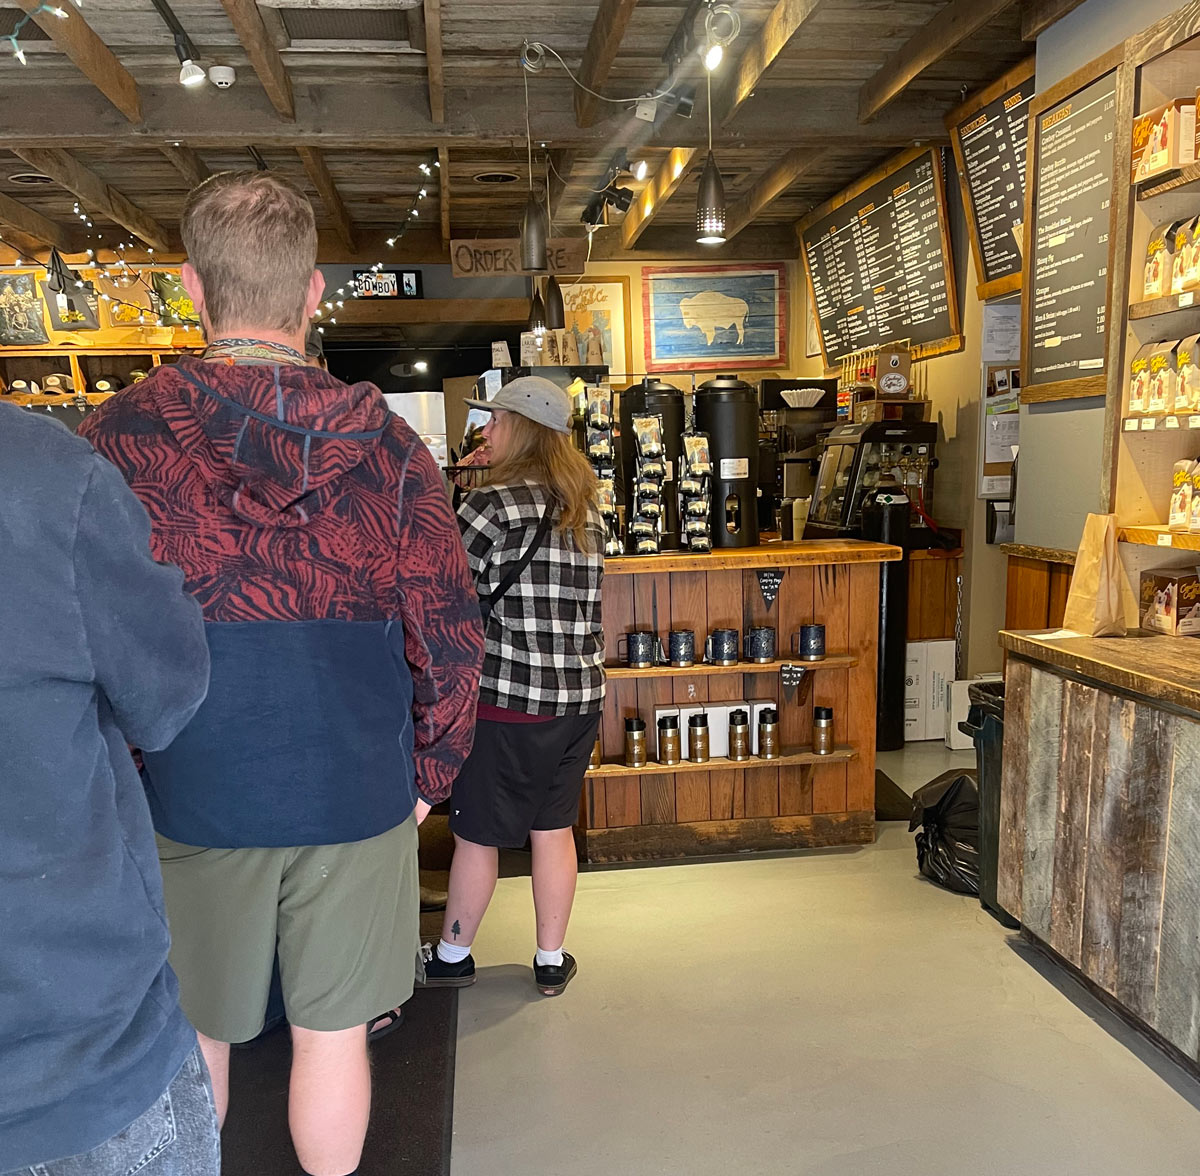 Customers waiting in line to order at Cowboy Coffee Town Center